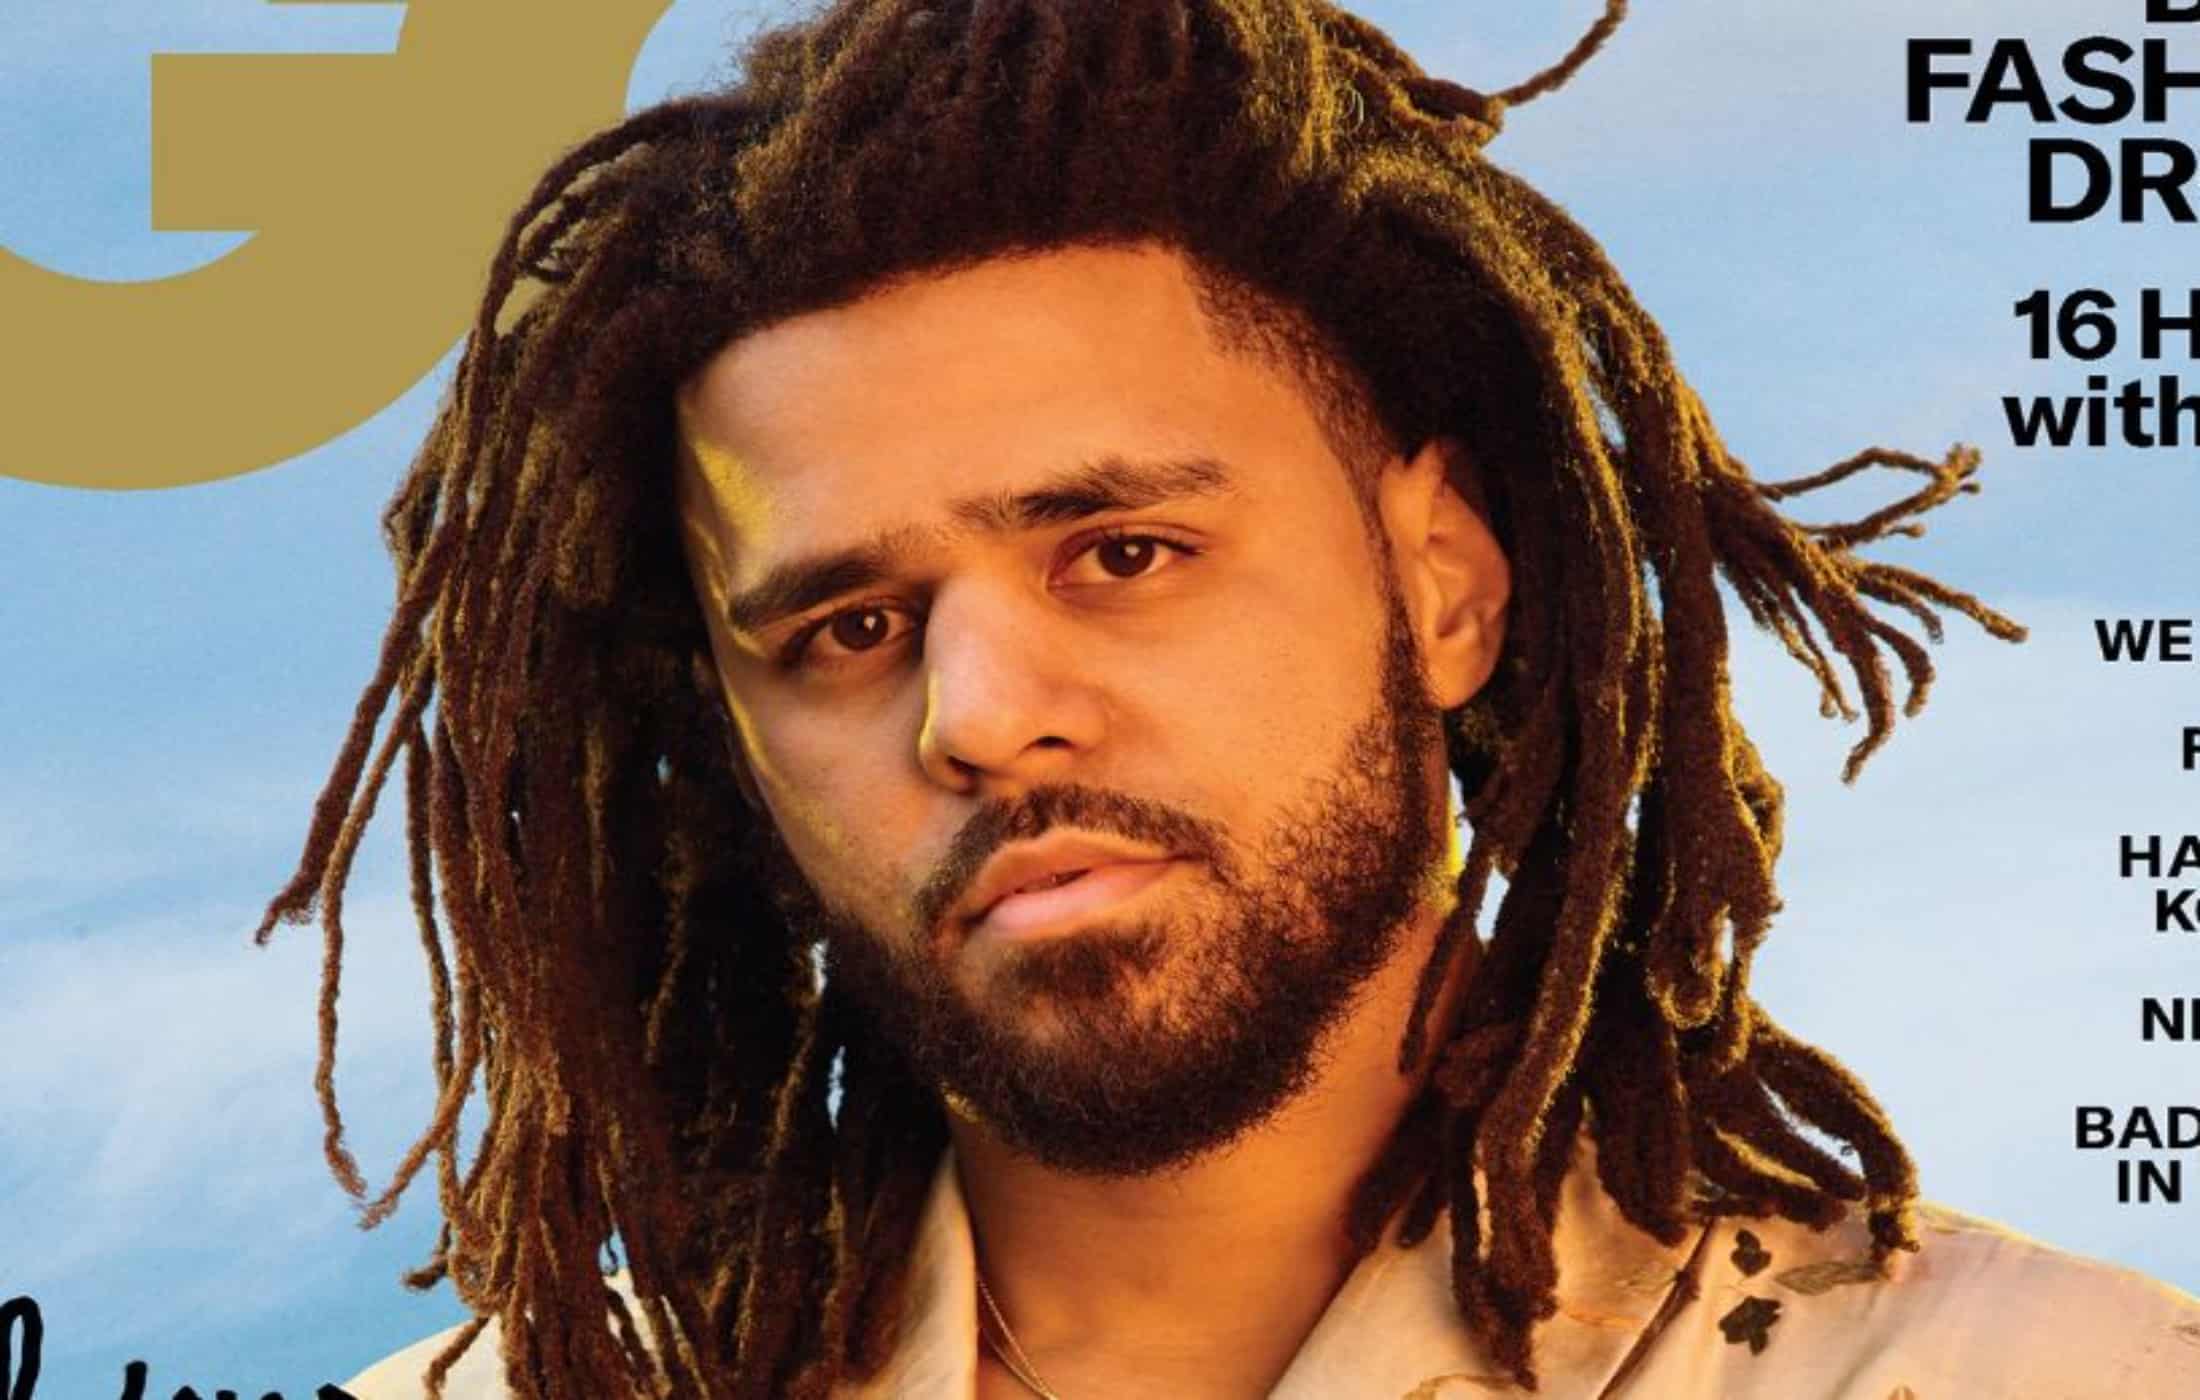 J Cole net worth, age, wiki, family, biography, wife, middle child, songs, NBA 2K23, children